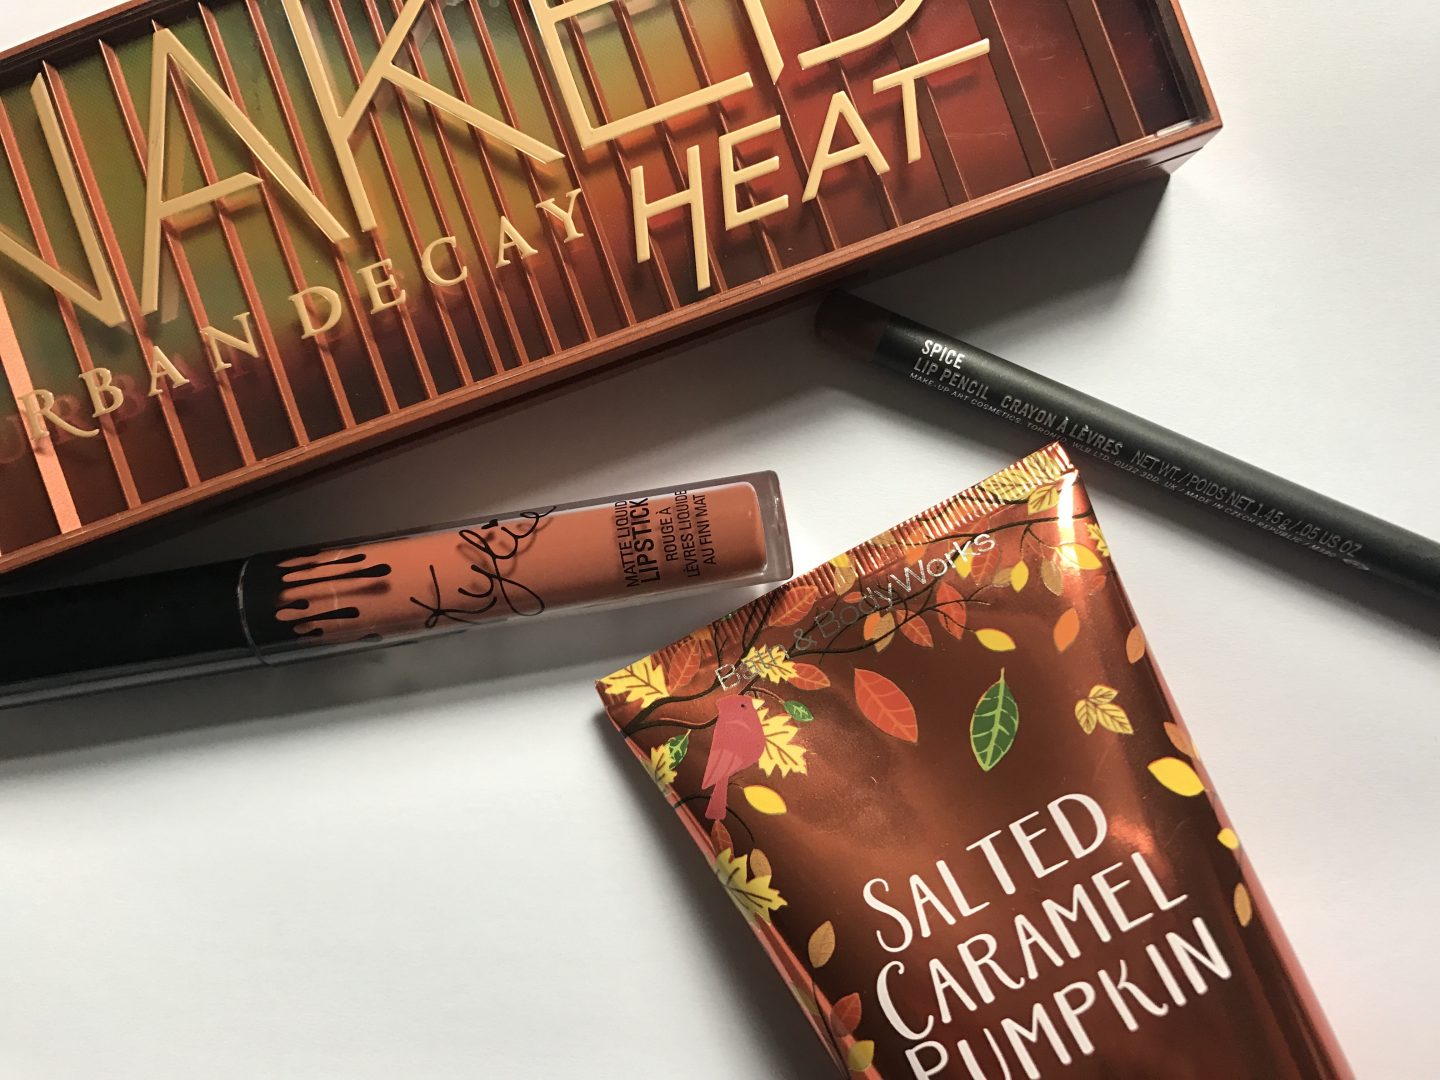 Naked Heat, Mac, Spice, Kylie Ginger